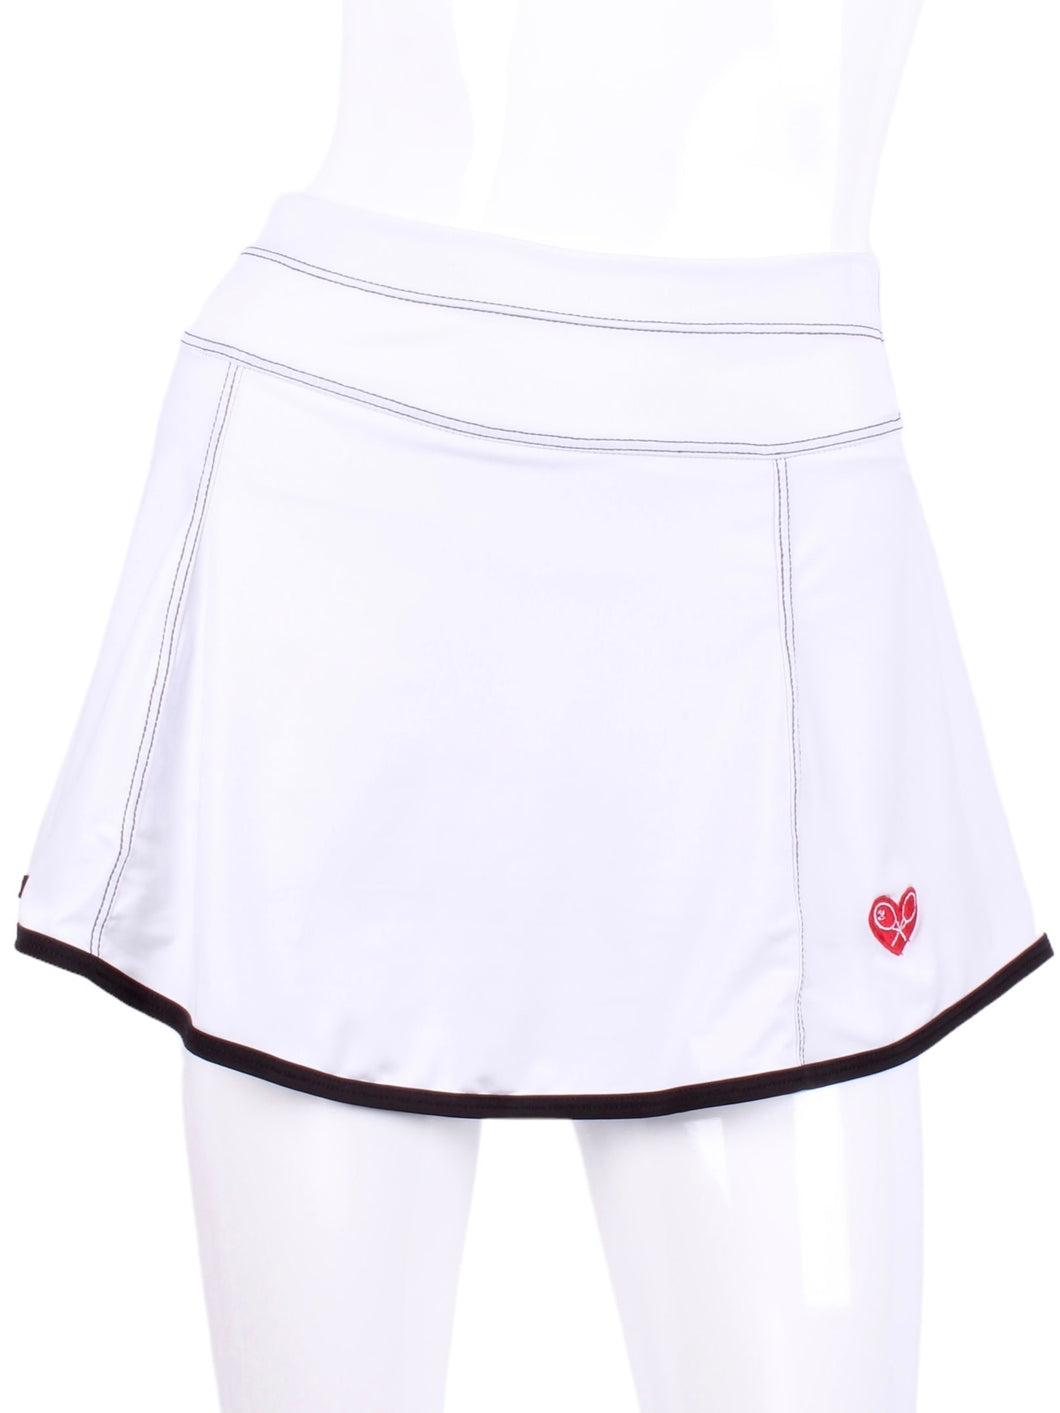  This is our limited edition Gladiator Skirt White.  This piece has a silky soft and quick-drying matching shorties, and binding to match.  We make these in very small quantities - by design.  Unique.  Luxurious.  Comfortable.  Cool.  Fun.